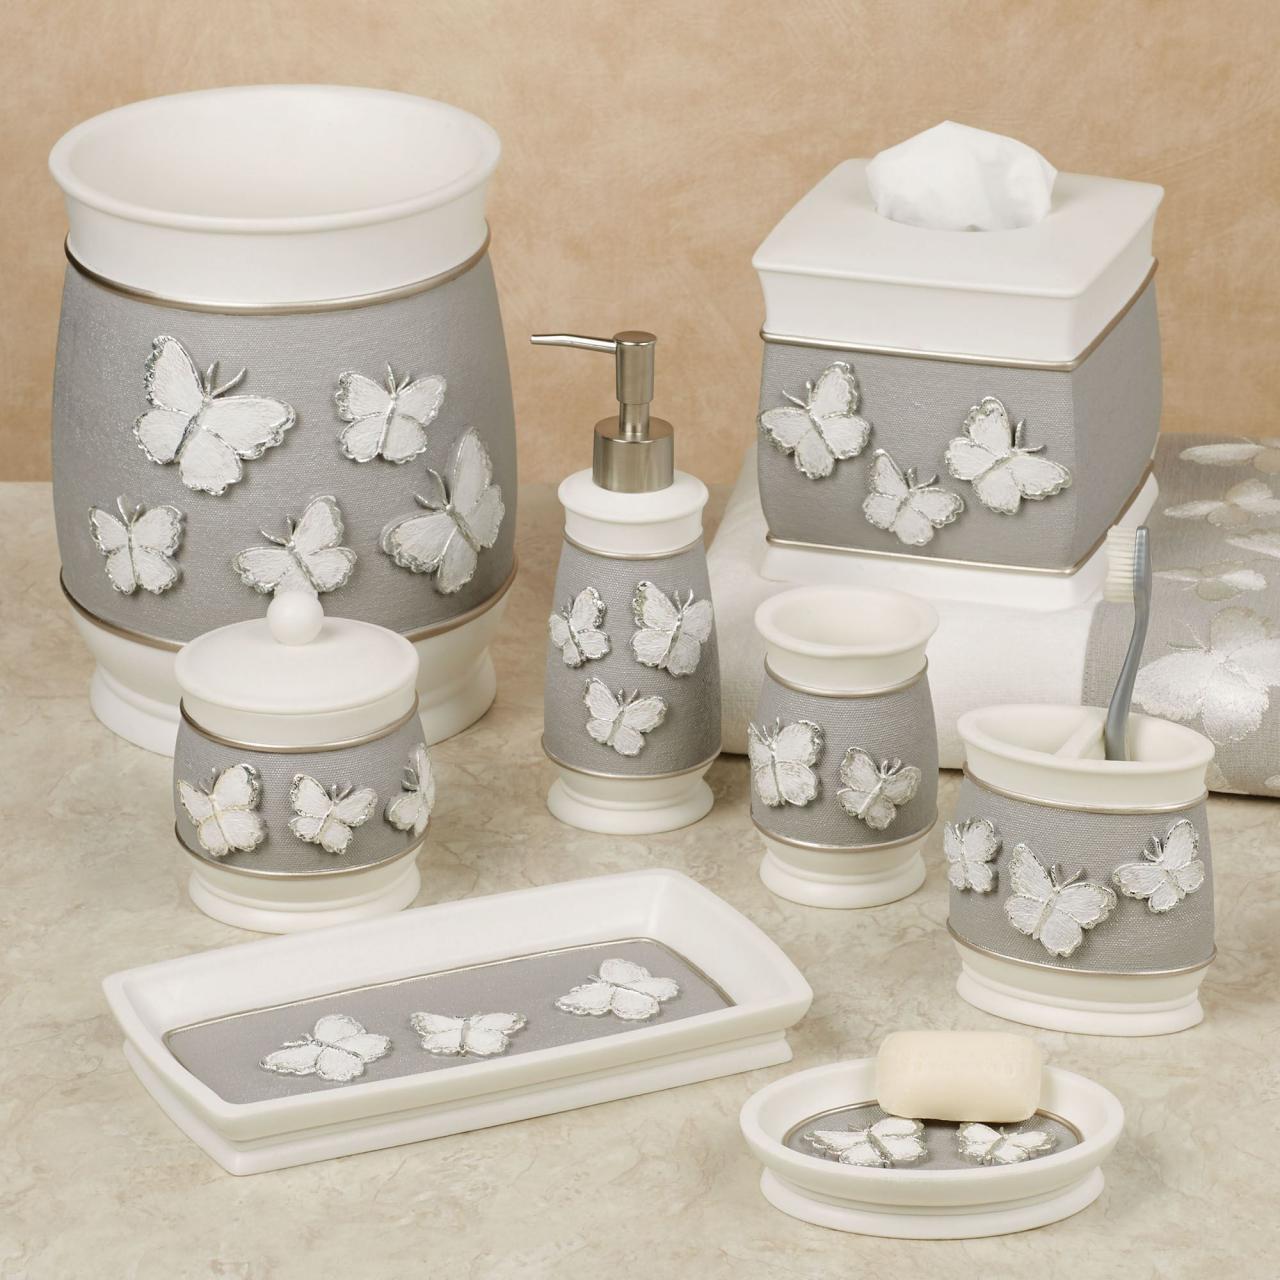 Butterfly Bathroom Sets Butterfly 3 Piece High Pile Bathroom Set With